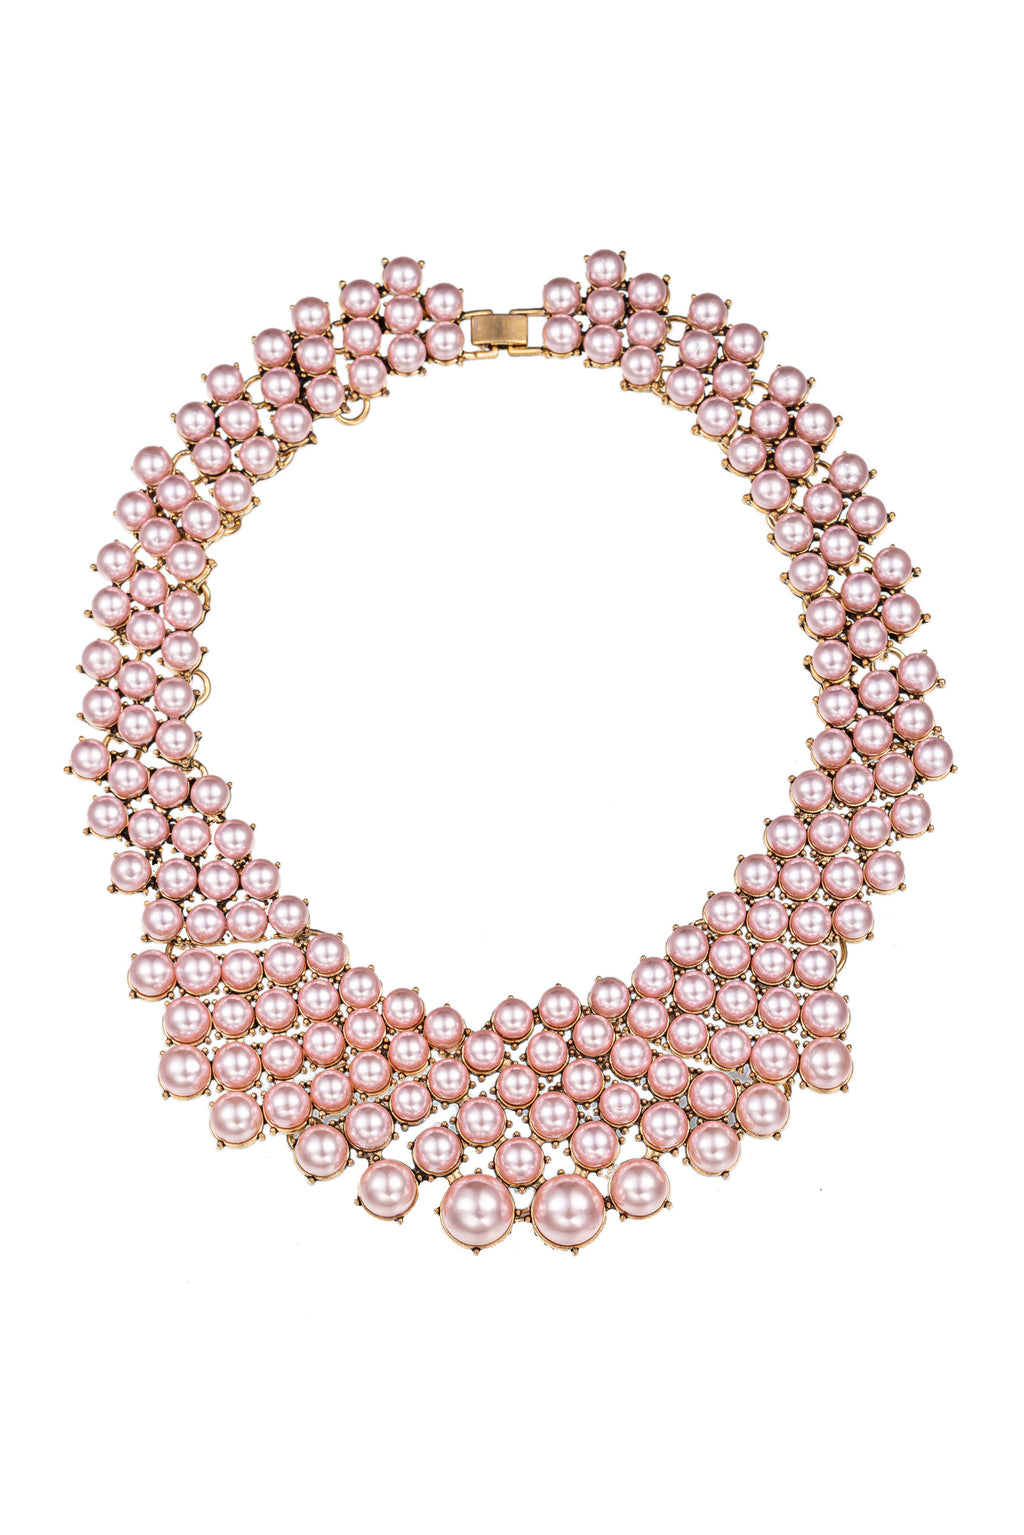 Pink alloy statement necklace studded with glass crystals.